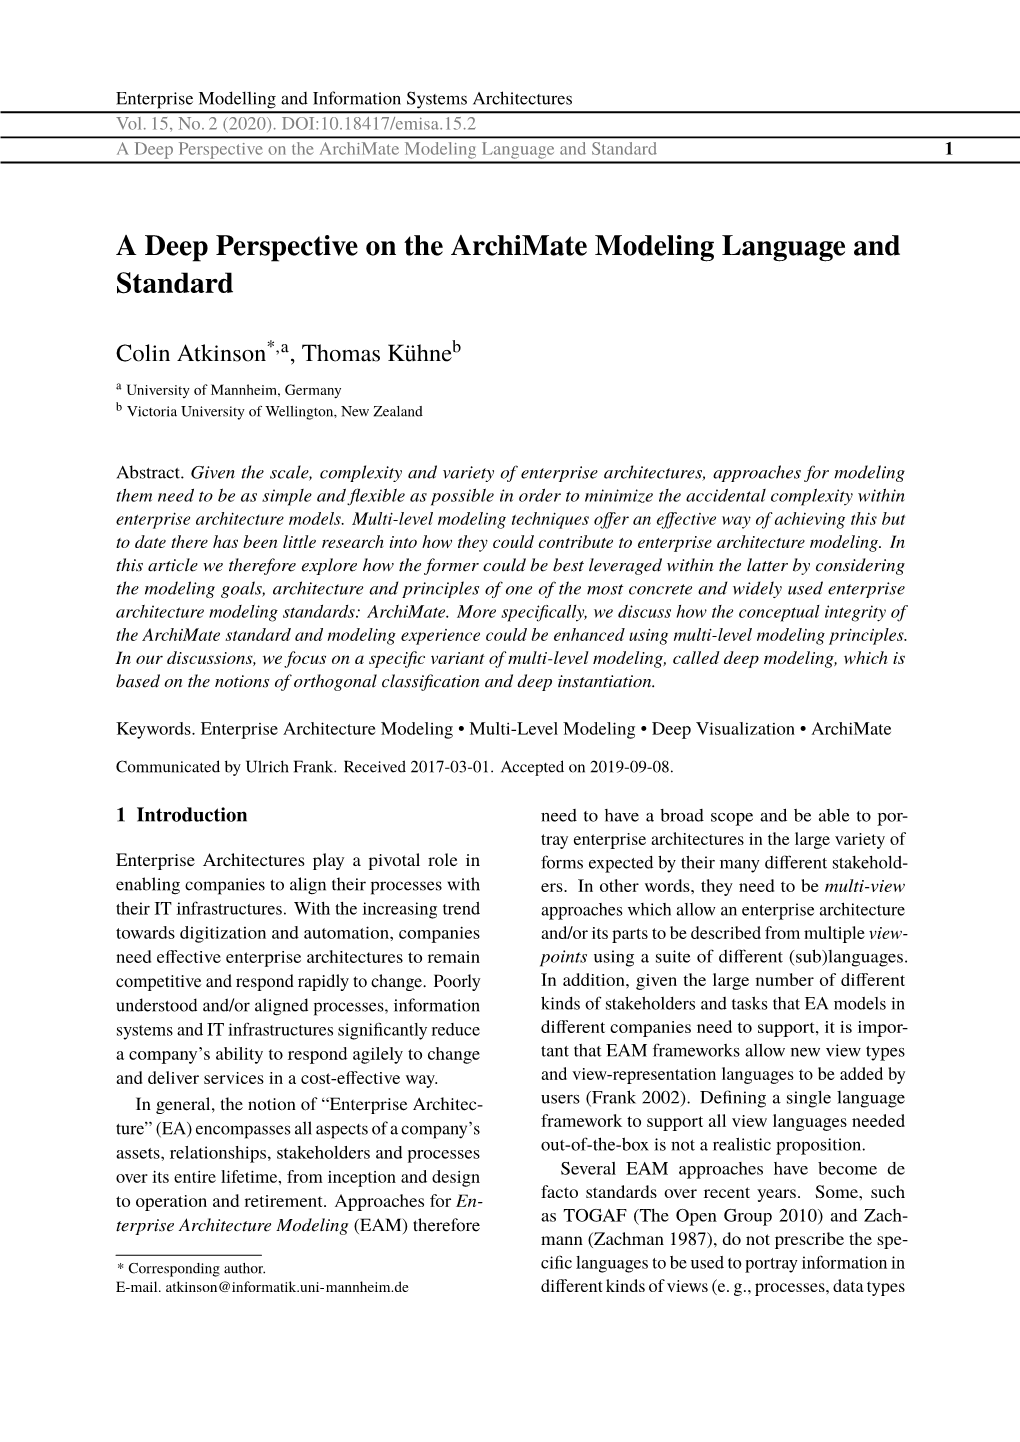 A Deep Perspective on the Archimate Modeling Language and Standard 1